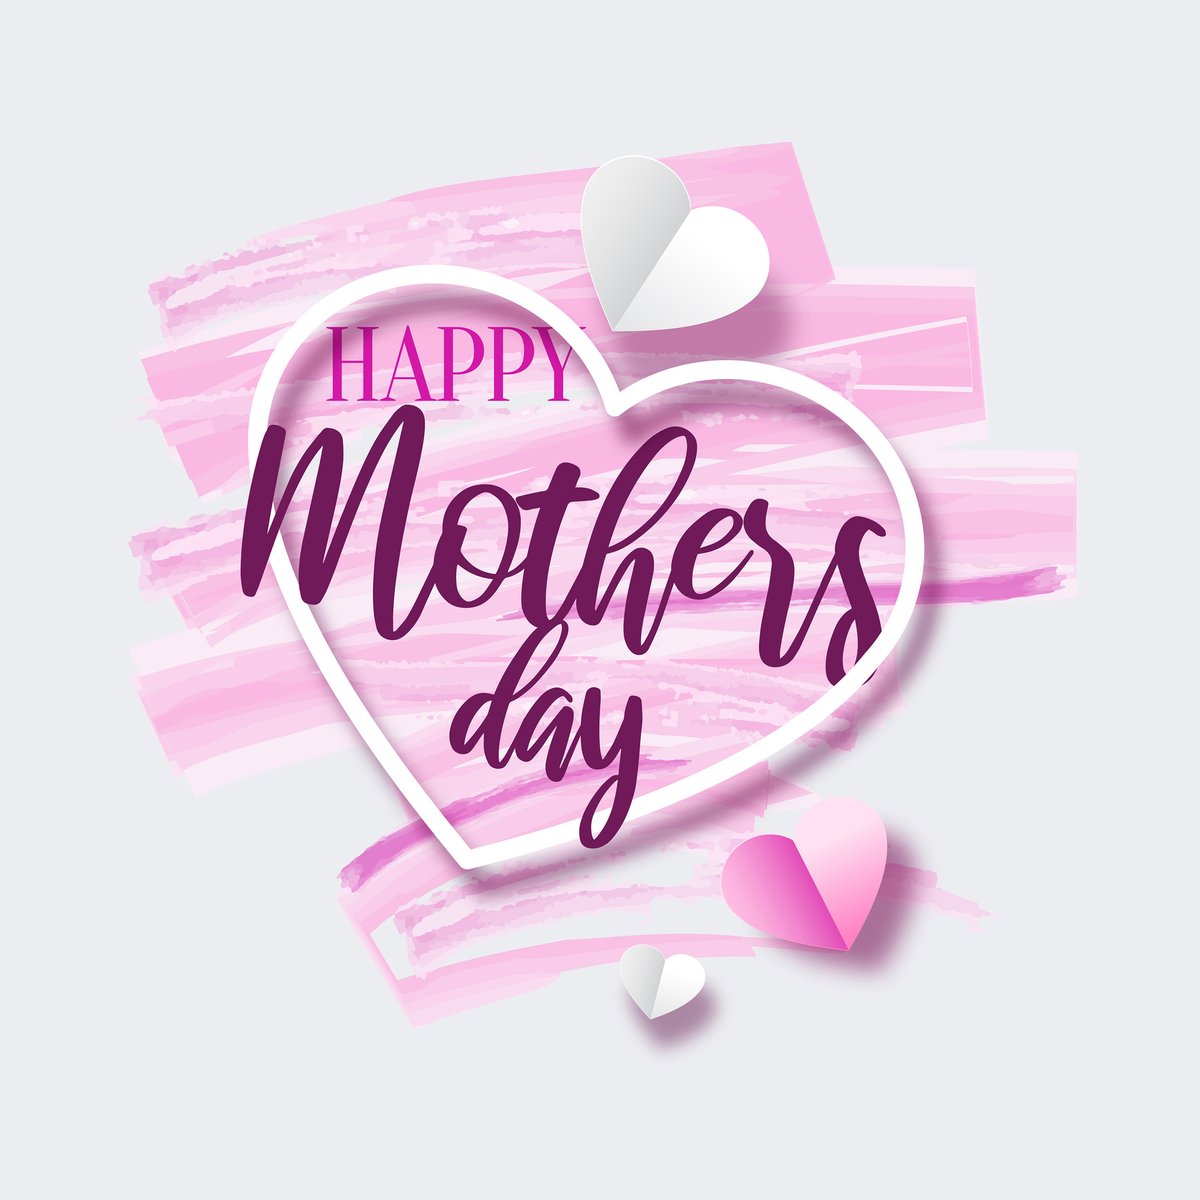 Happy Mother's Day! The Maxy Awards knows that all of the beautiful mothers of the world are a big part of the reason we live and breathe, thank you! We hope you have a wonderful day! #MothersDay #HappyMothersDay #MaxyAwards